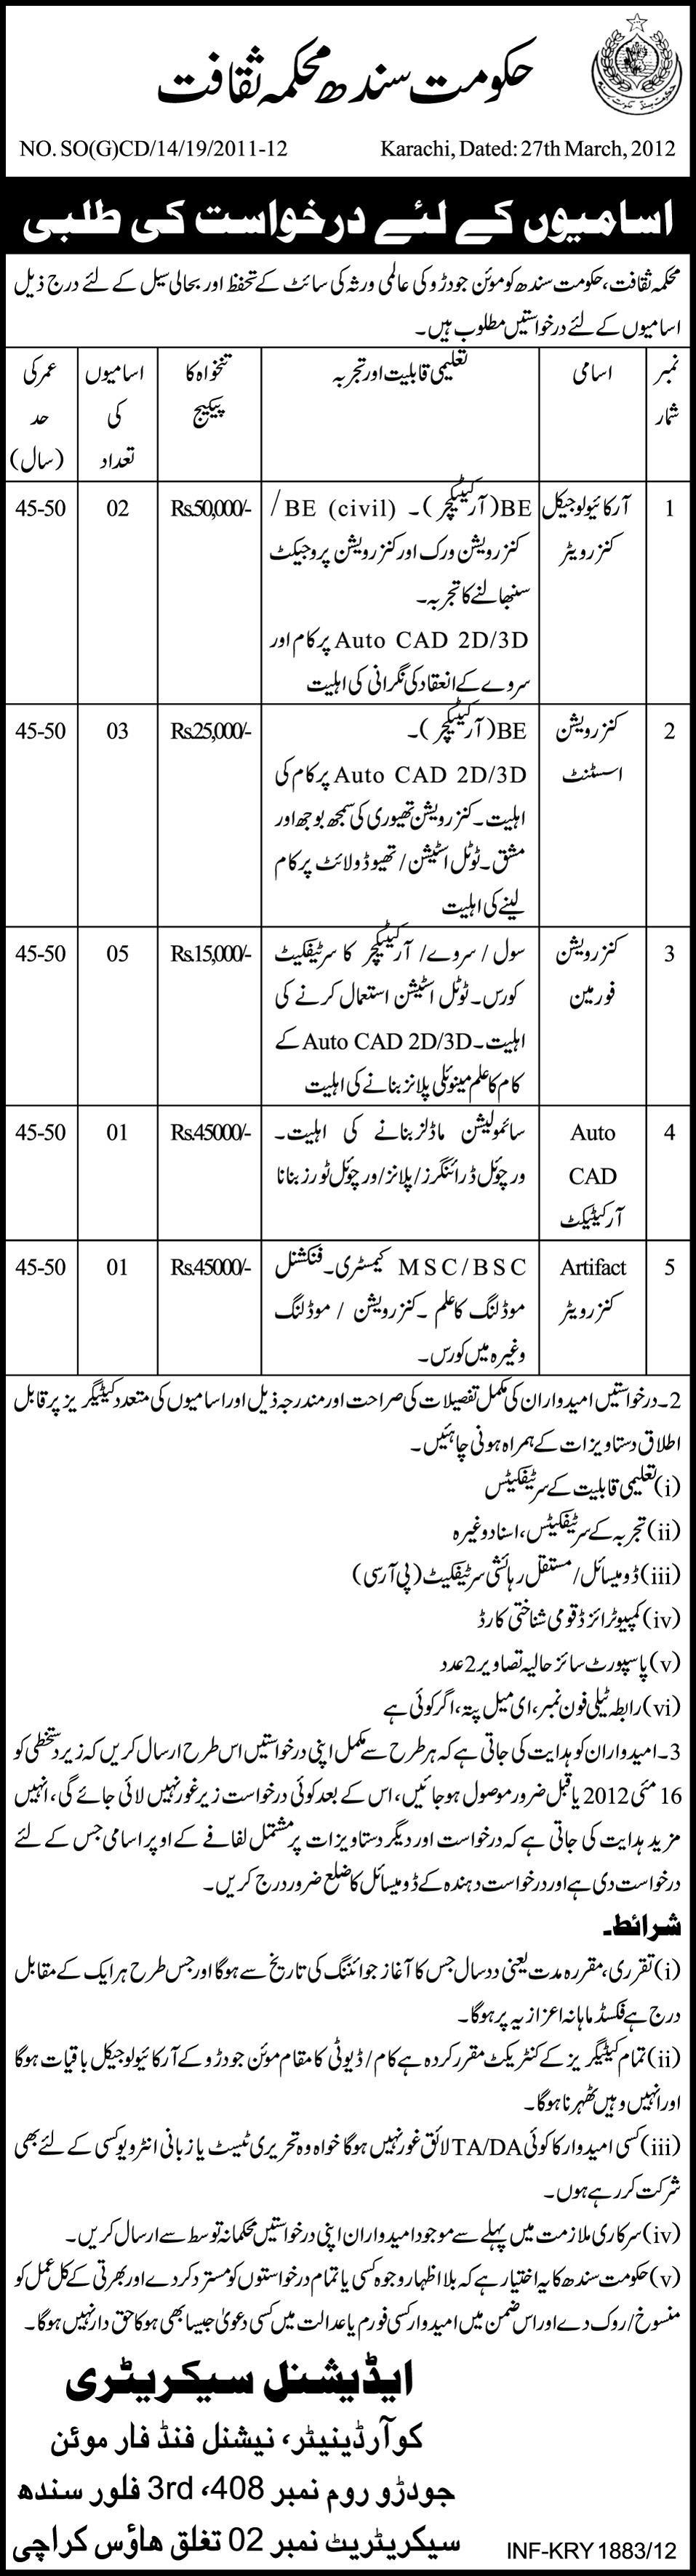 Jobs in Heritage Department of Sindh Government (Govt. job)